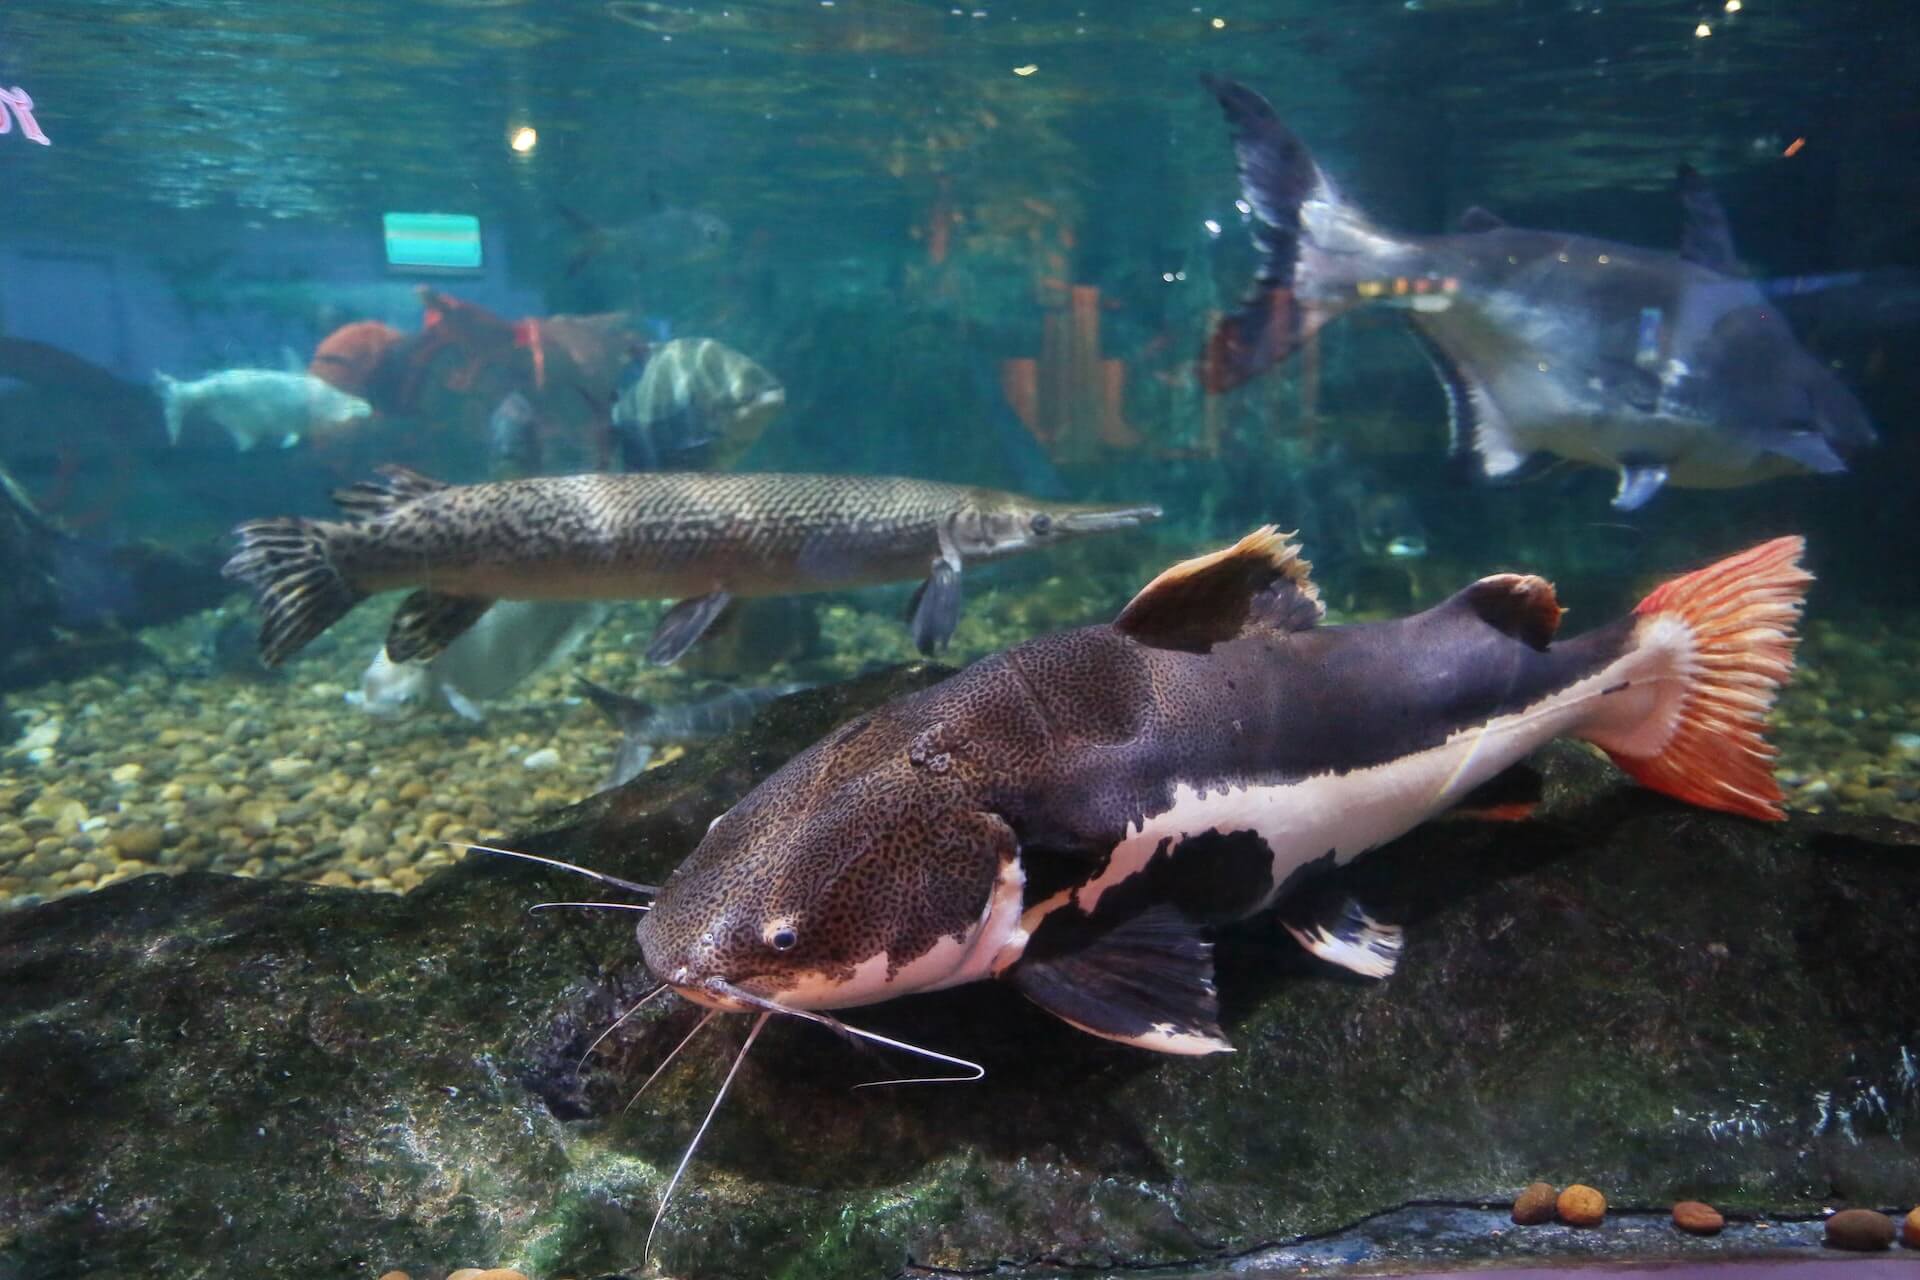 catfish in tank with other fish